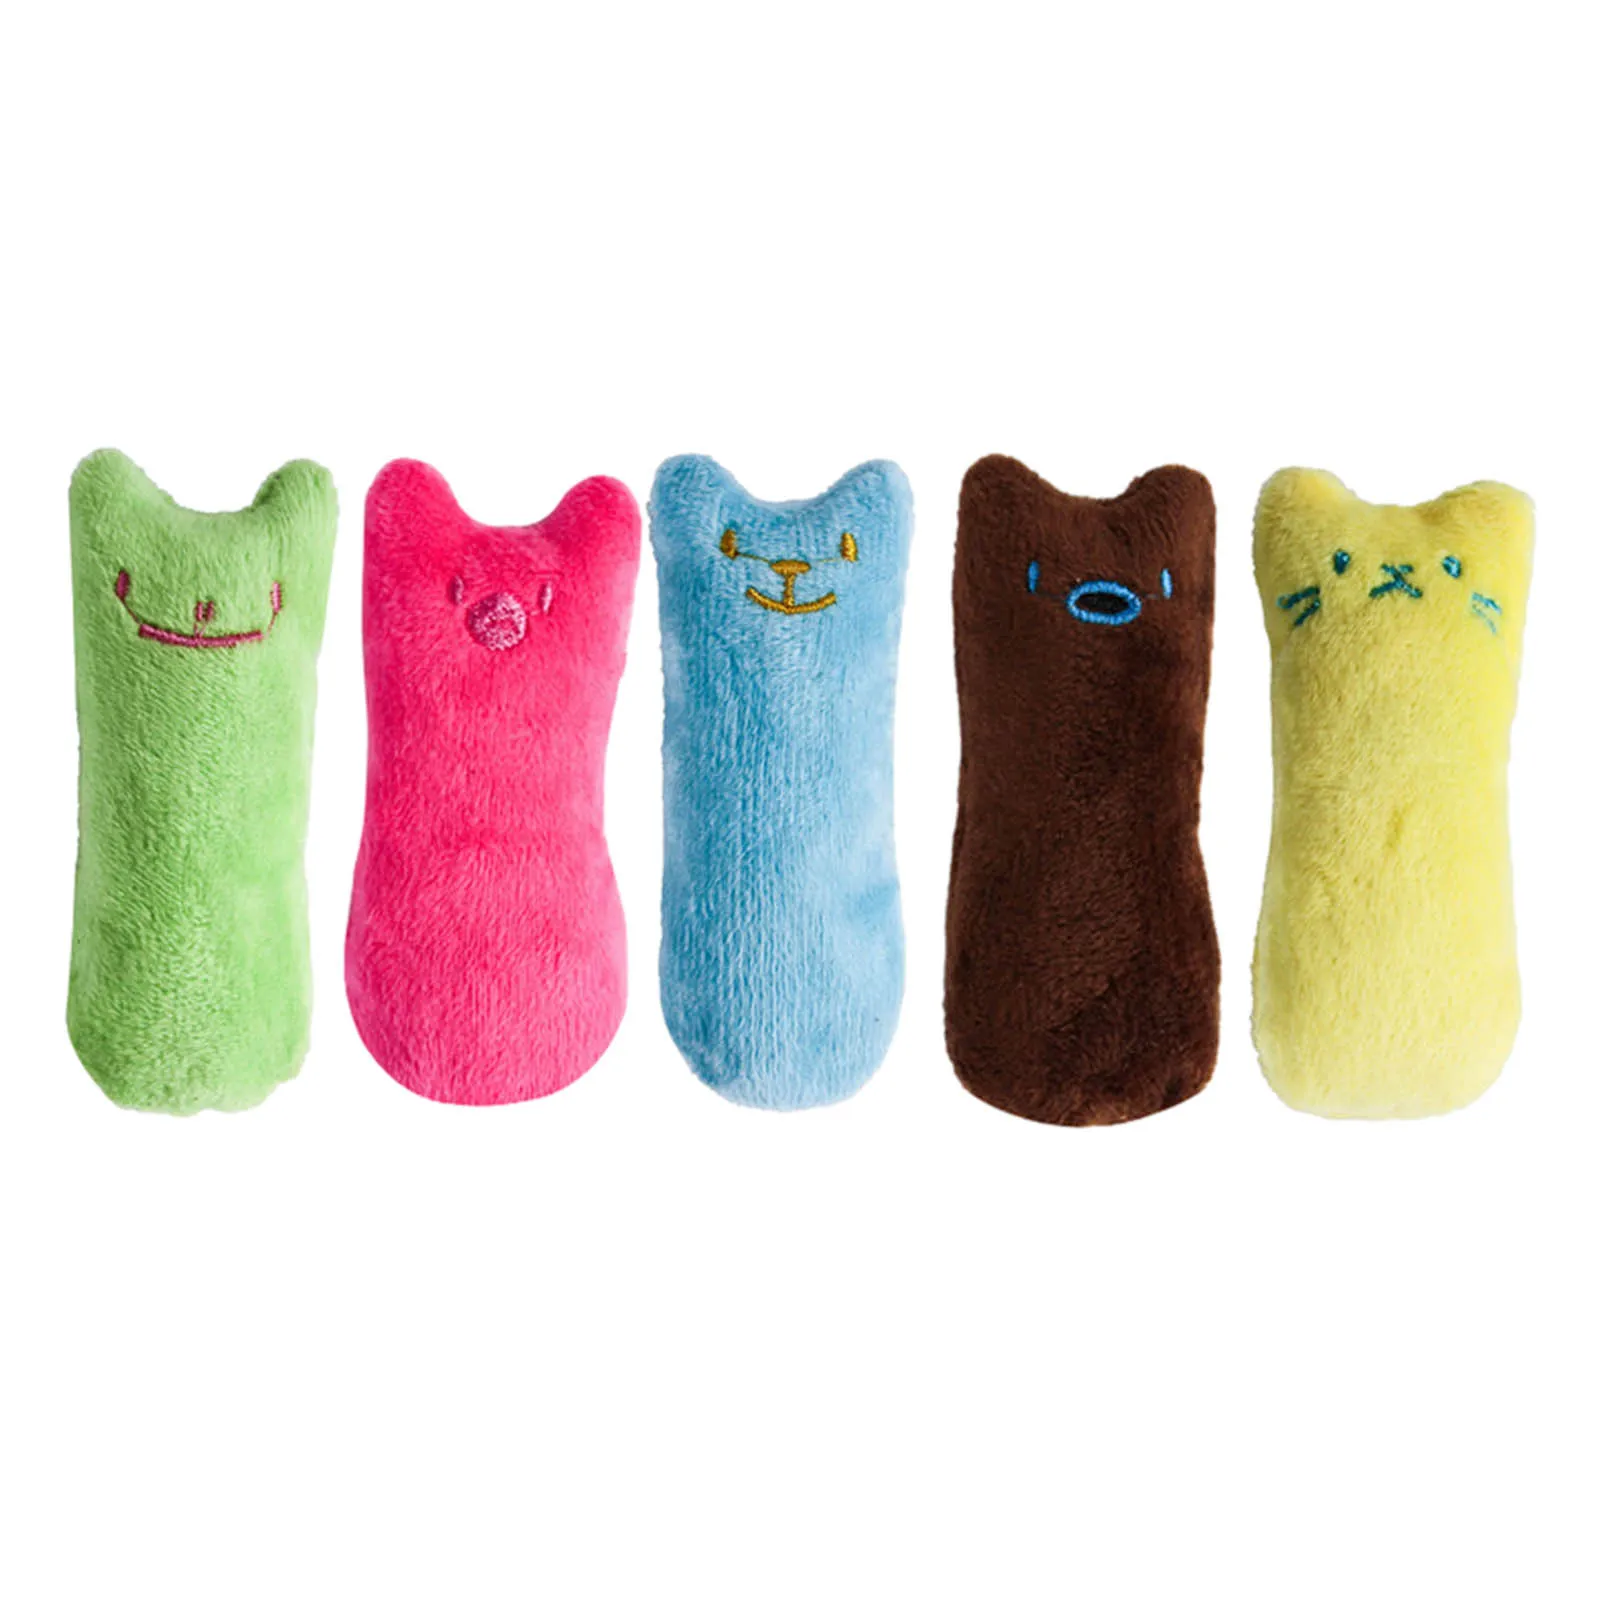 

Cat Chew Toy With Catnip/sound paper Interactive Teeth Grinding Plush Toy little thumb toy Bite resistant cartoon Finger cot